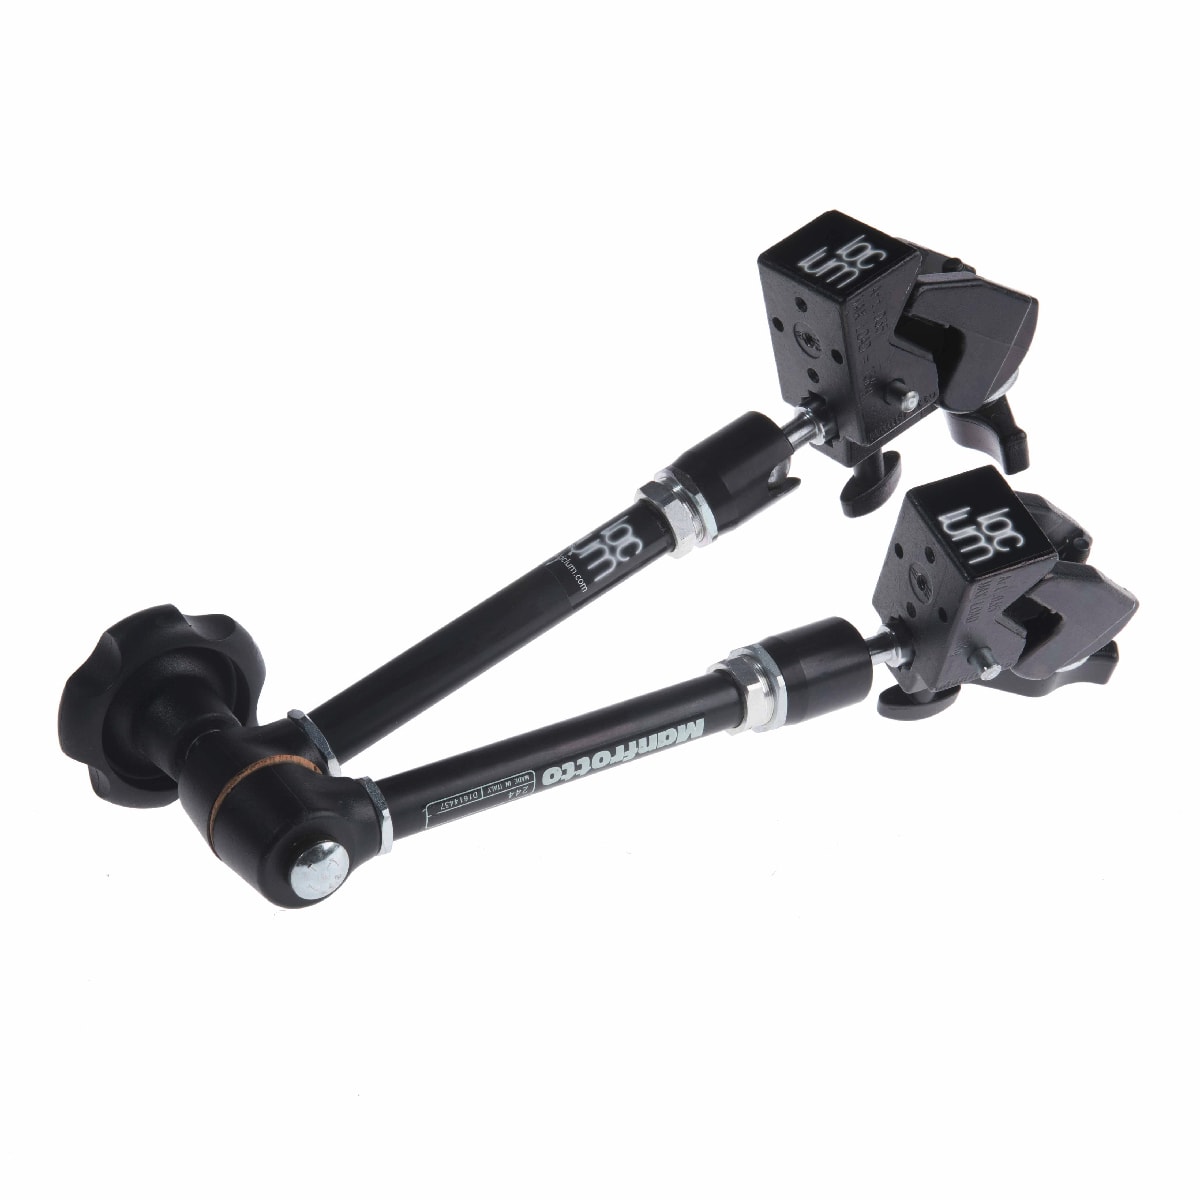 Manfrotto Magic Arm (244N) with 2 x Super Clamps (035)